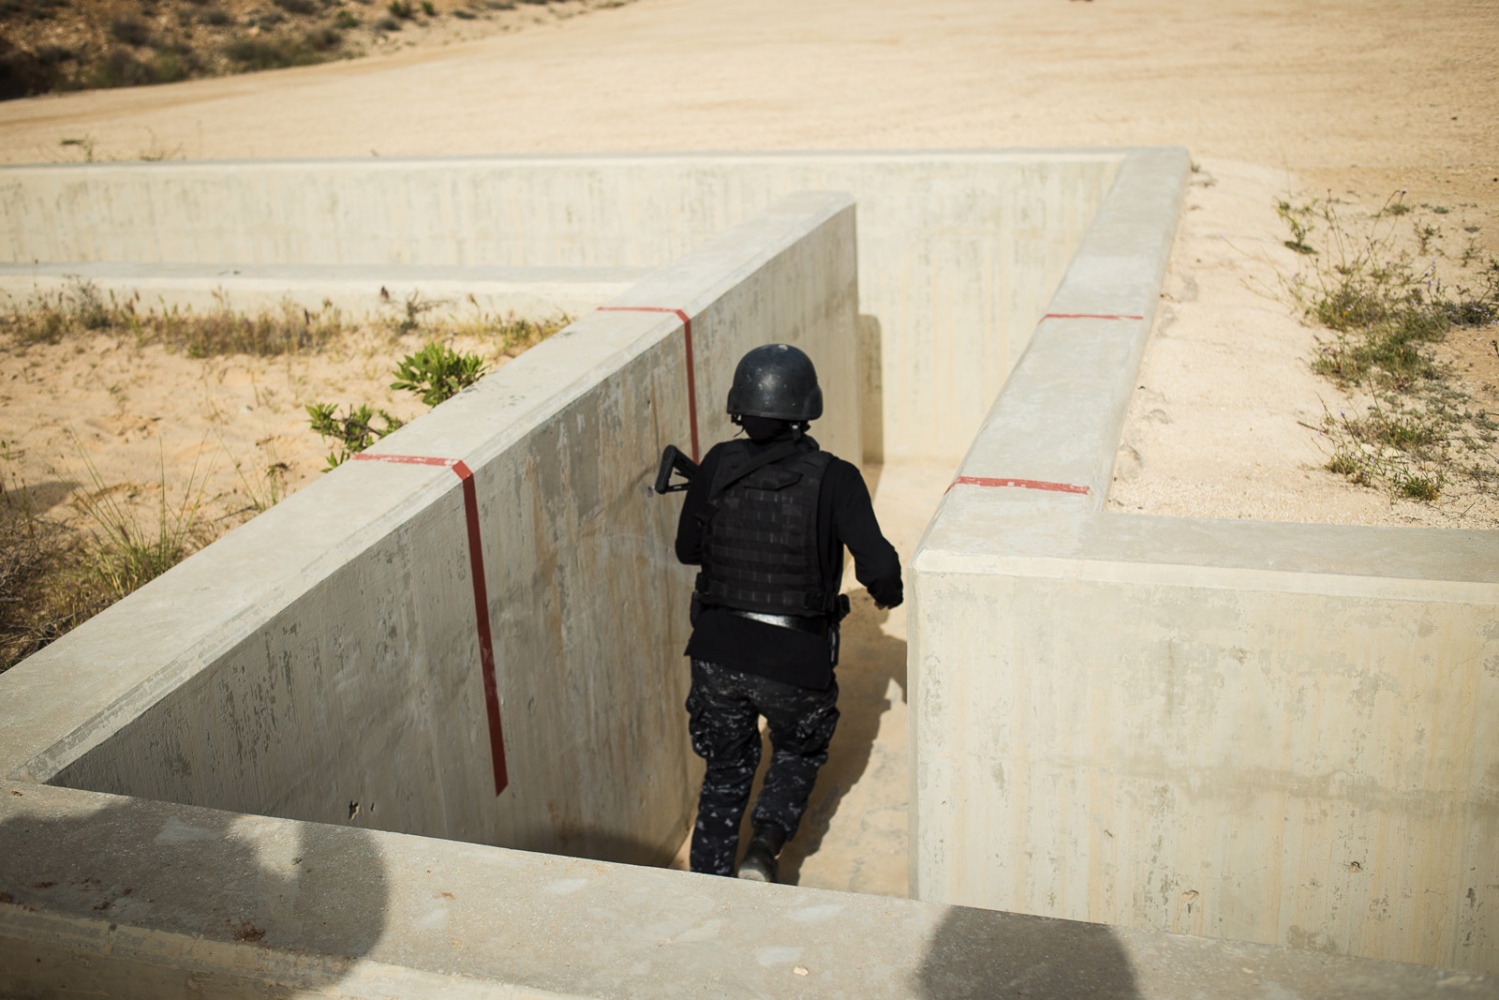  The all-women's Unit 30 SWAT Police team from Jordan competes in the three-gun gauntlet during the seventh annual Warrior Competition at the King Abdullah II Special Operations Training Center near Amman, Jordan, on April 20, 2015. 